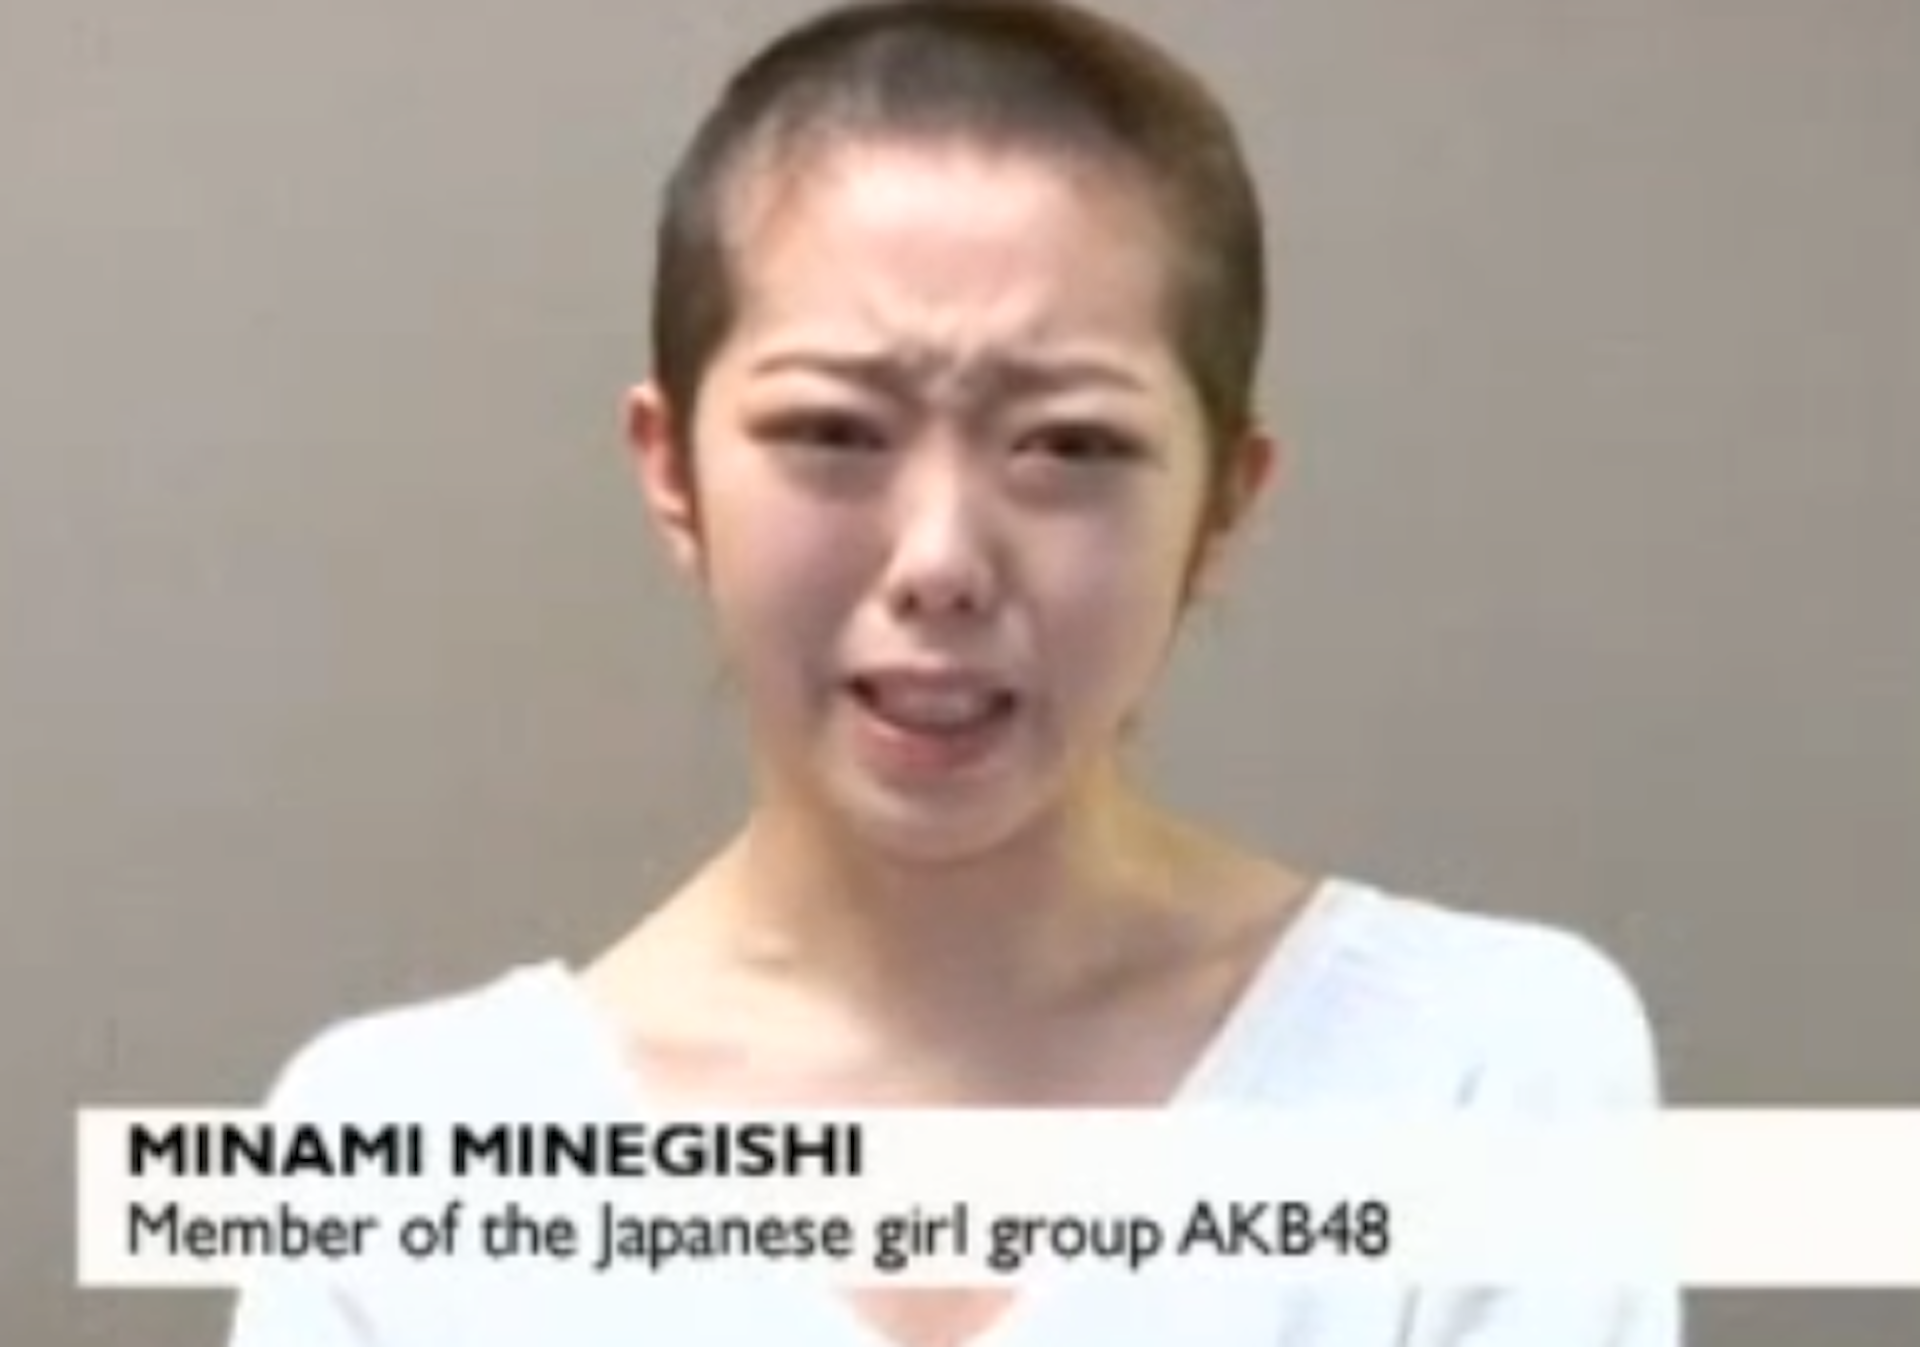 AKB48, headshaving and the sexual politics of J-Pop